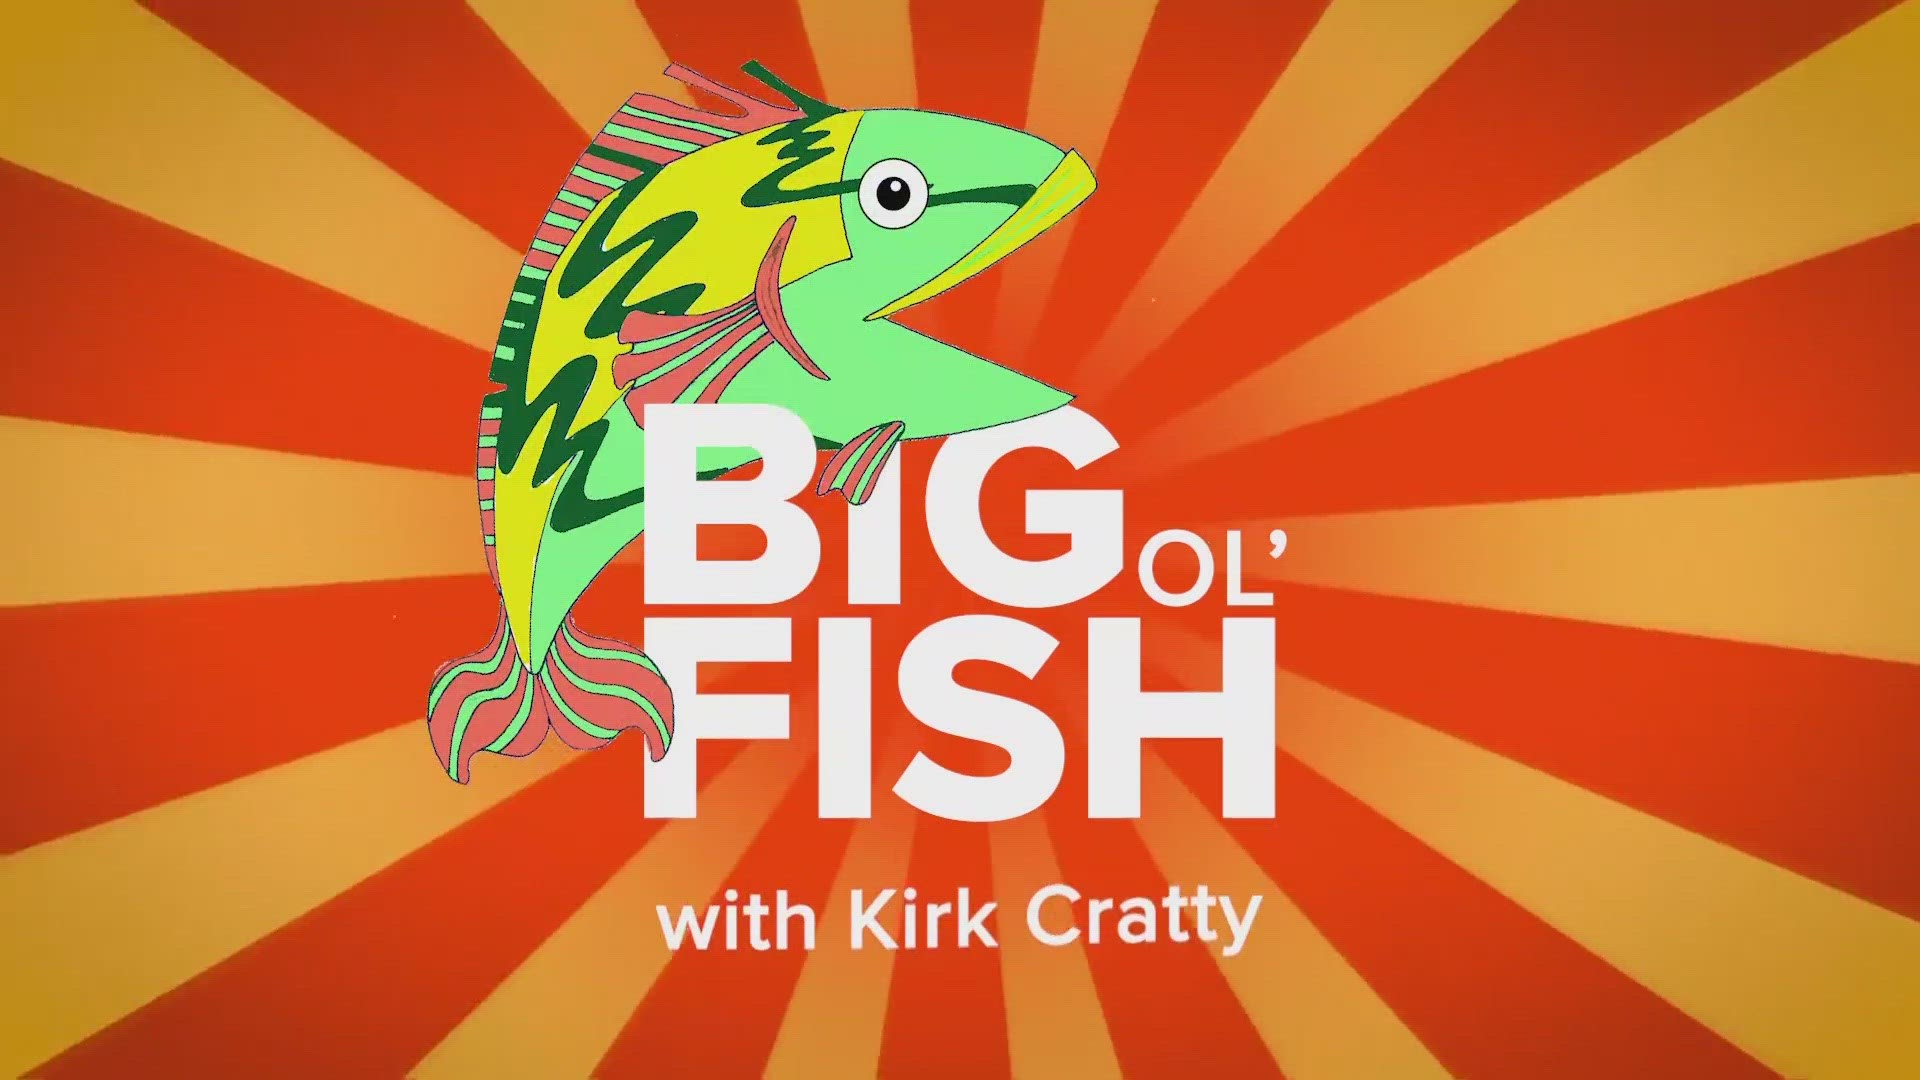 It's the Big Ol' Fish show with Kirk Cratty on Sunday, Sept. 24, 2023.